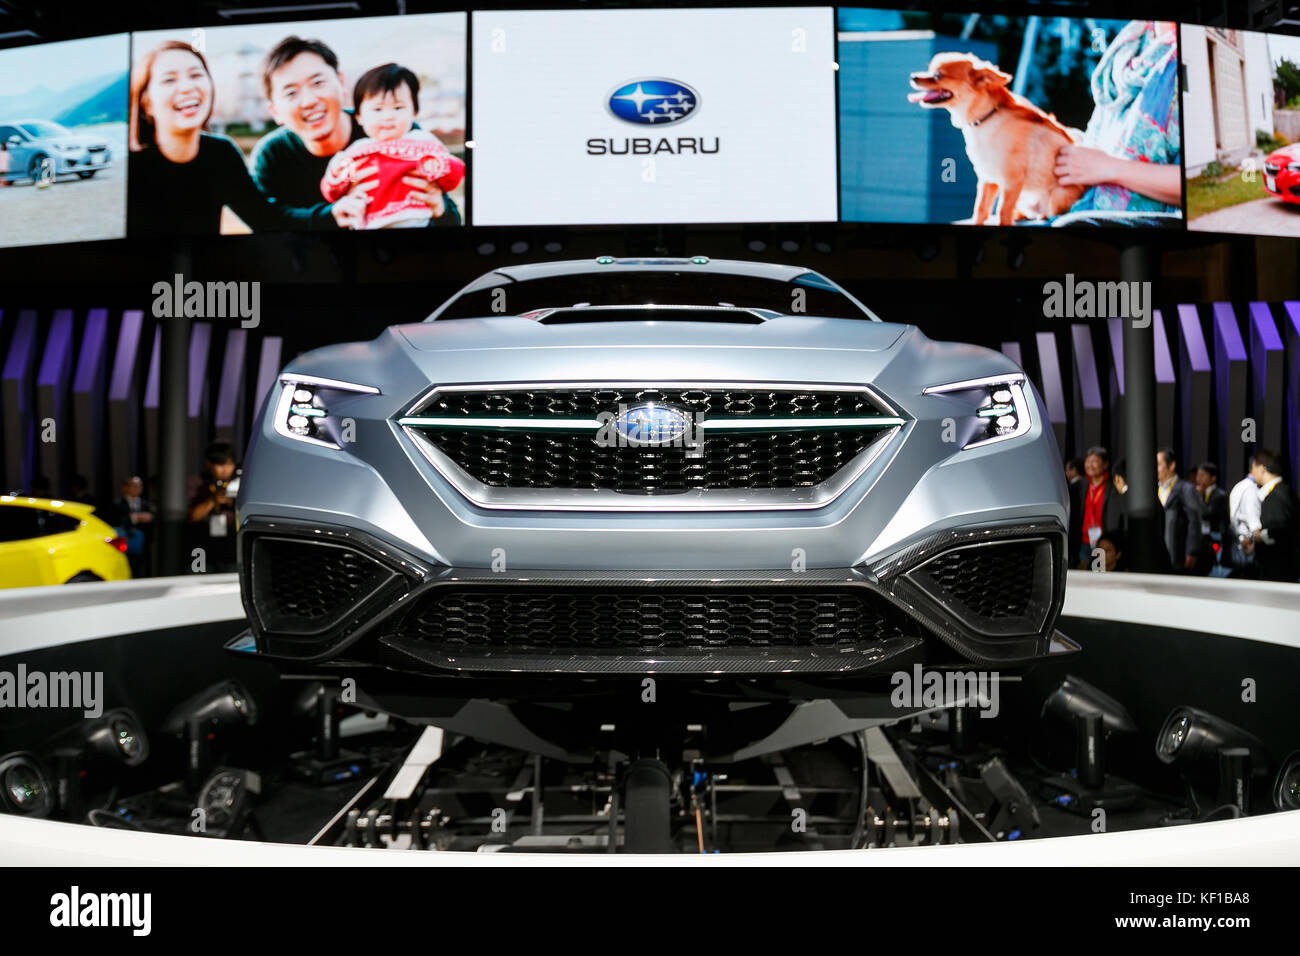 Tokyo, Japan. 25th Oct, 2017. The new Subaru VIZIV PERFORMANCE CONCEPT vehicle on display during the 45th Tokyo Motor Show 2017 in Tokyo Big Sight on October 25, 2017, Tokyo, Japan. Tokyo Motor Show 2017 will showcase new mobility solutions from over 153 Japanese and overseas automakers. The exhibition is open to the public from October 26 to November 5. Credit: Rodrigo Reyes Marin/AFLO/Alamy Live News Stock Photo